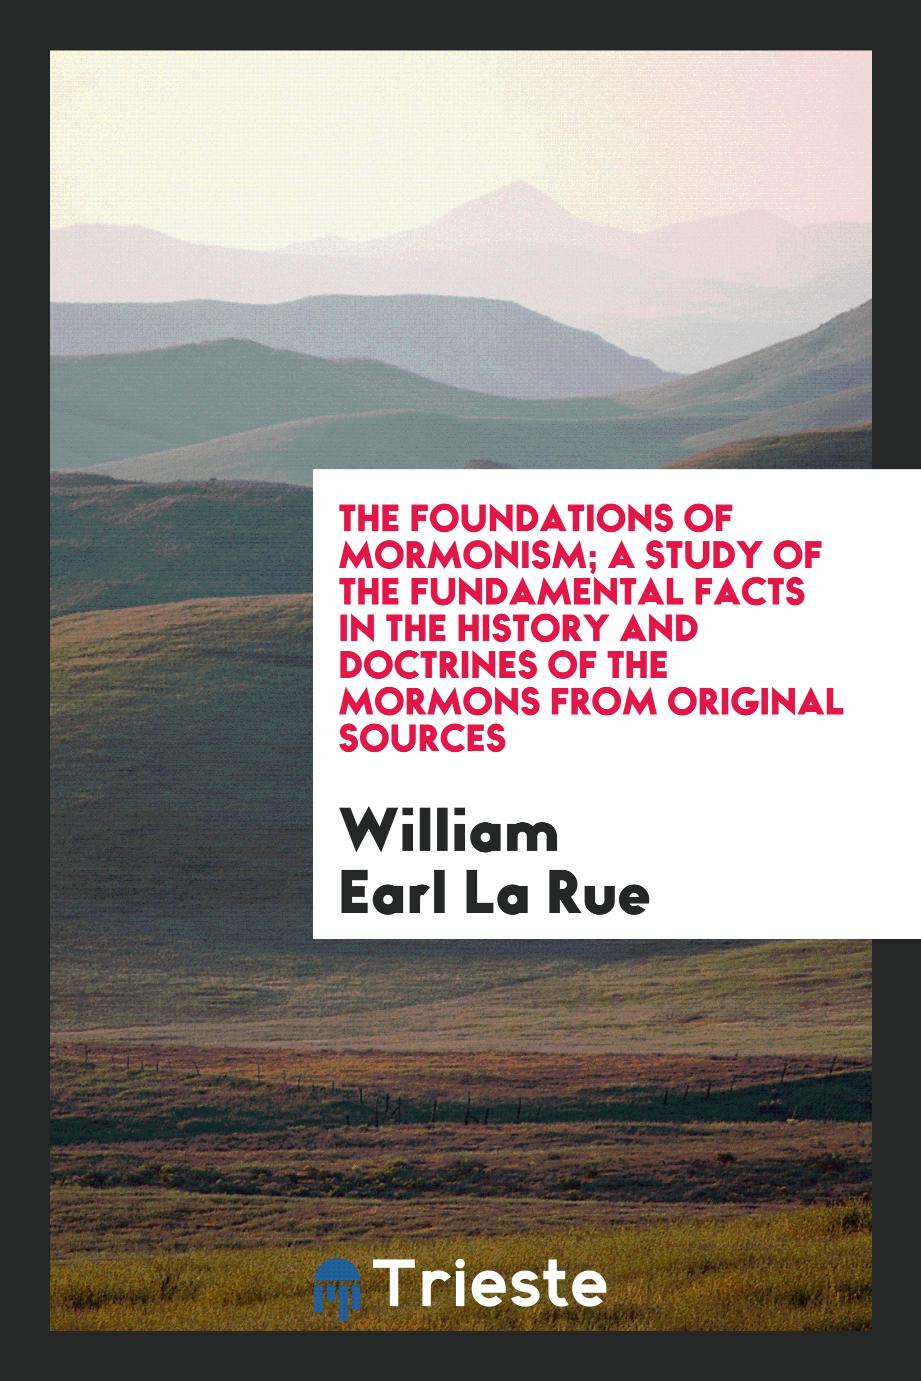 The Foundations of Mormonism; A Study of the Fundamental Facts in the History and Doctrines of the Mormons from Original Sources